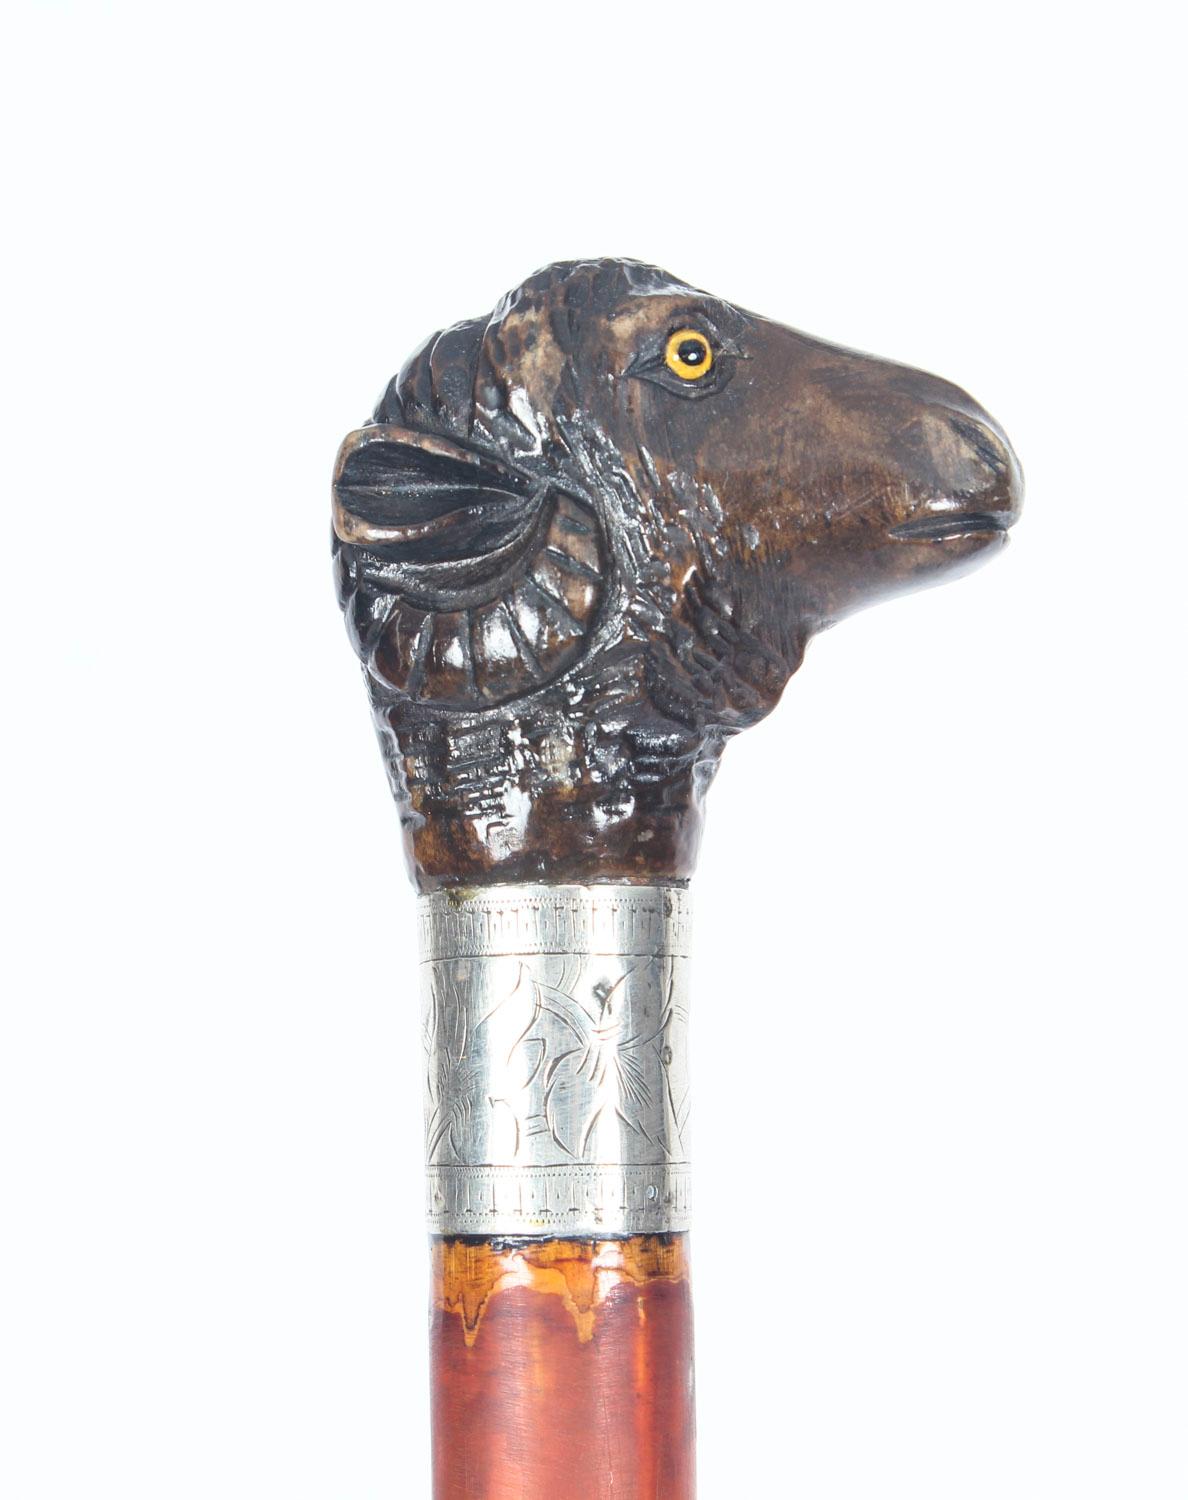 Late 19th Century Antique Ram's Head Walking Cane Stick Sterling Silver Collar, 19th Century